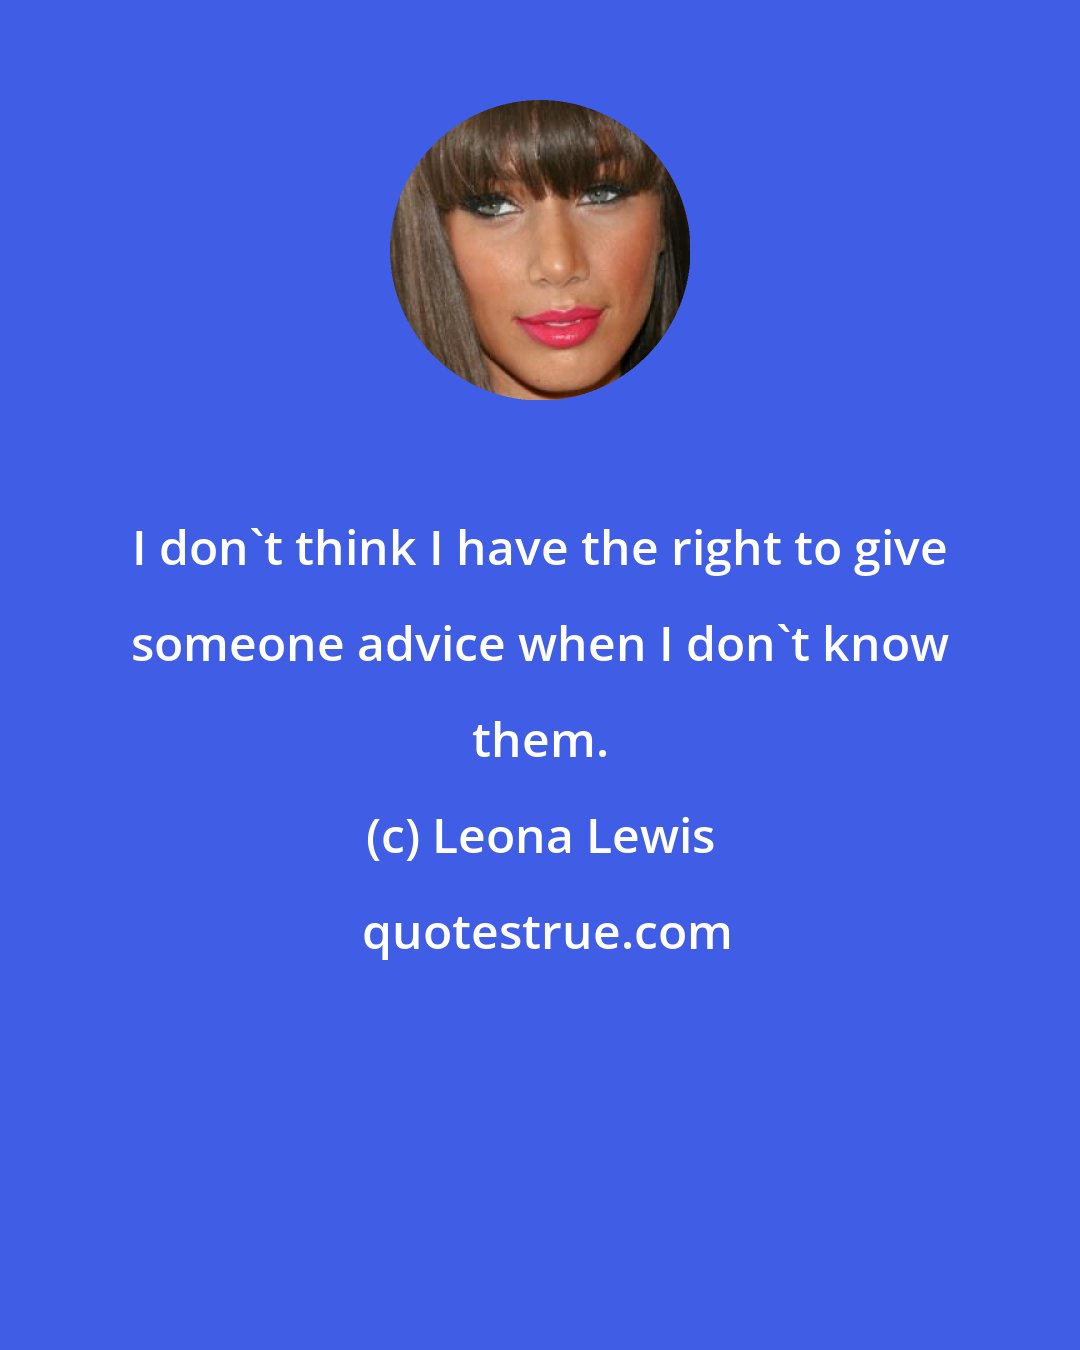 Leona Lewis: I don't think I have the right to give someone advice when I don't know them.